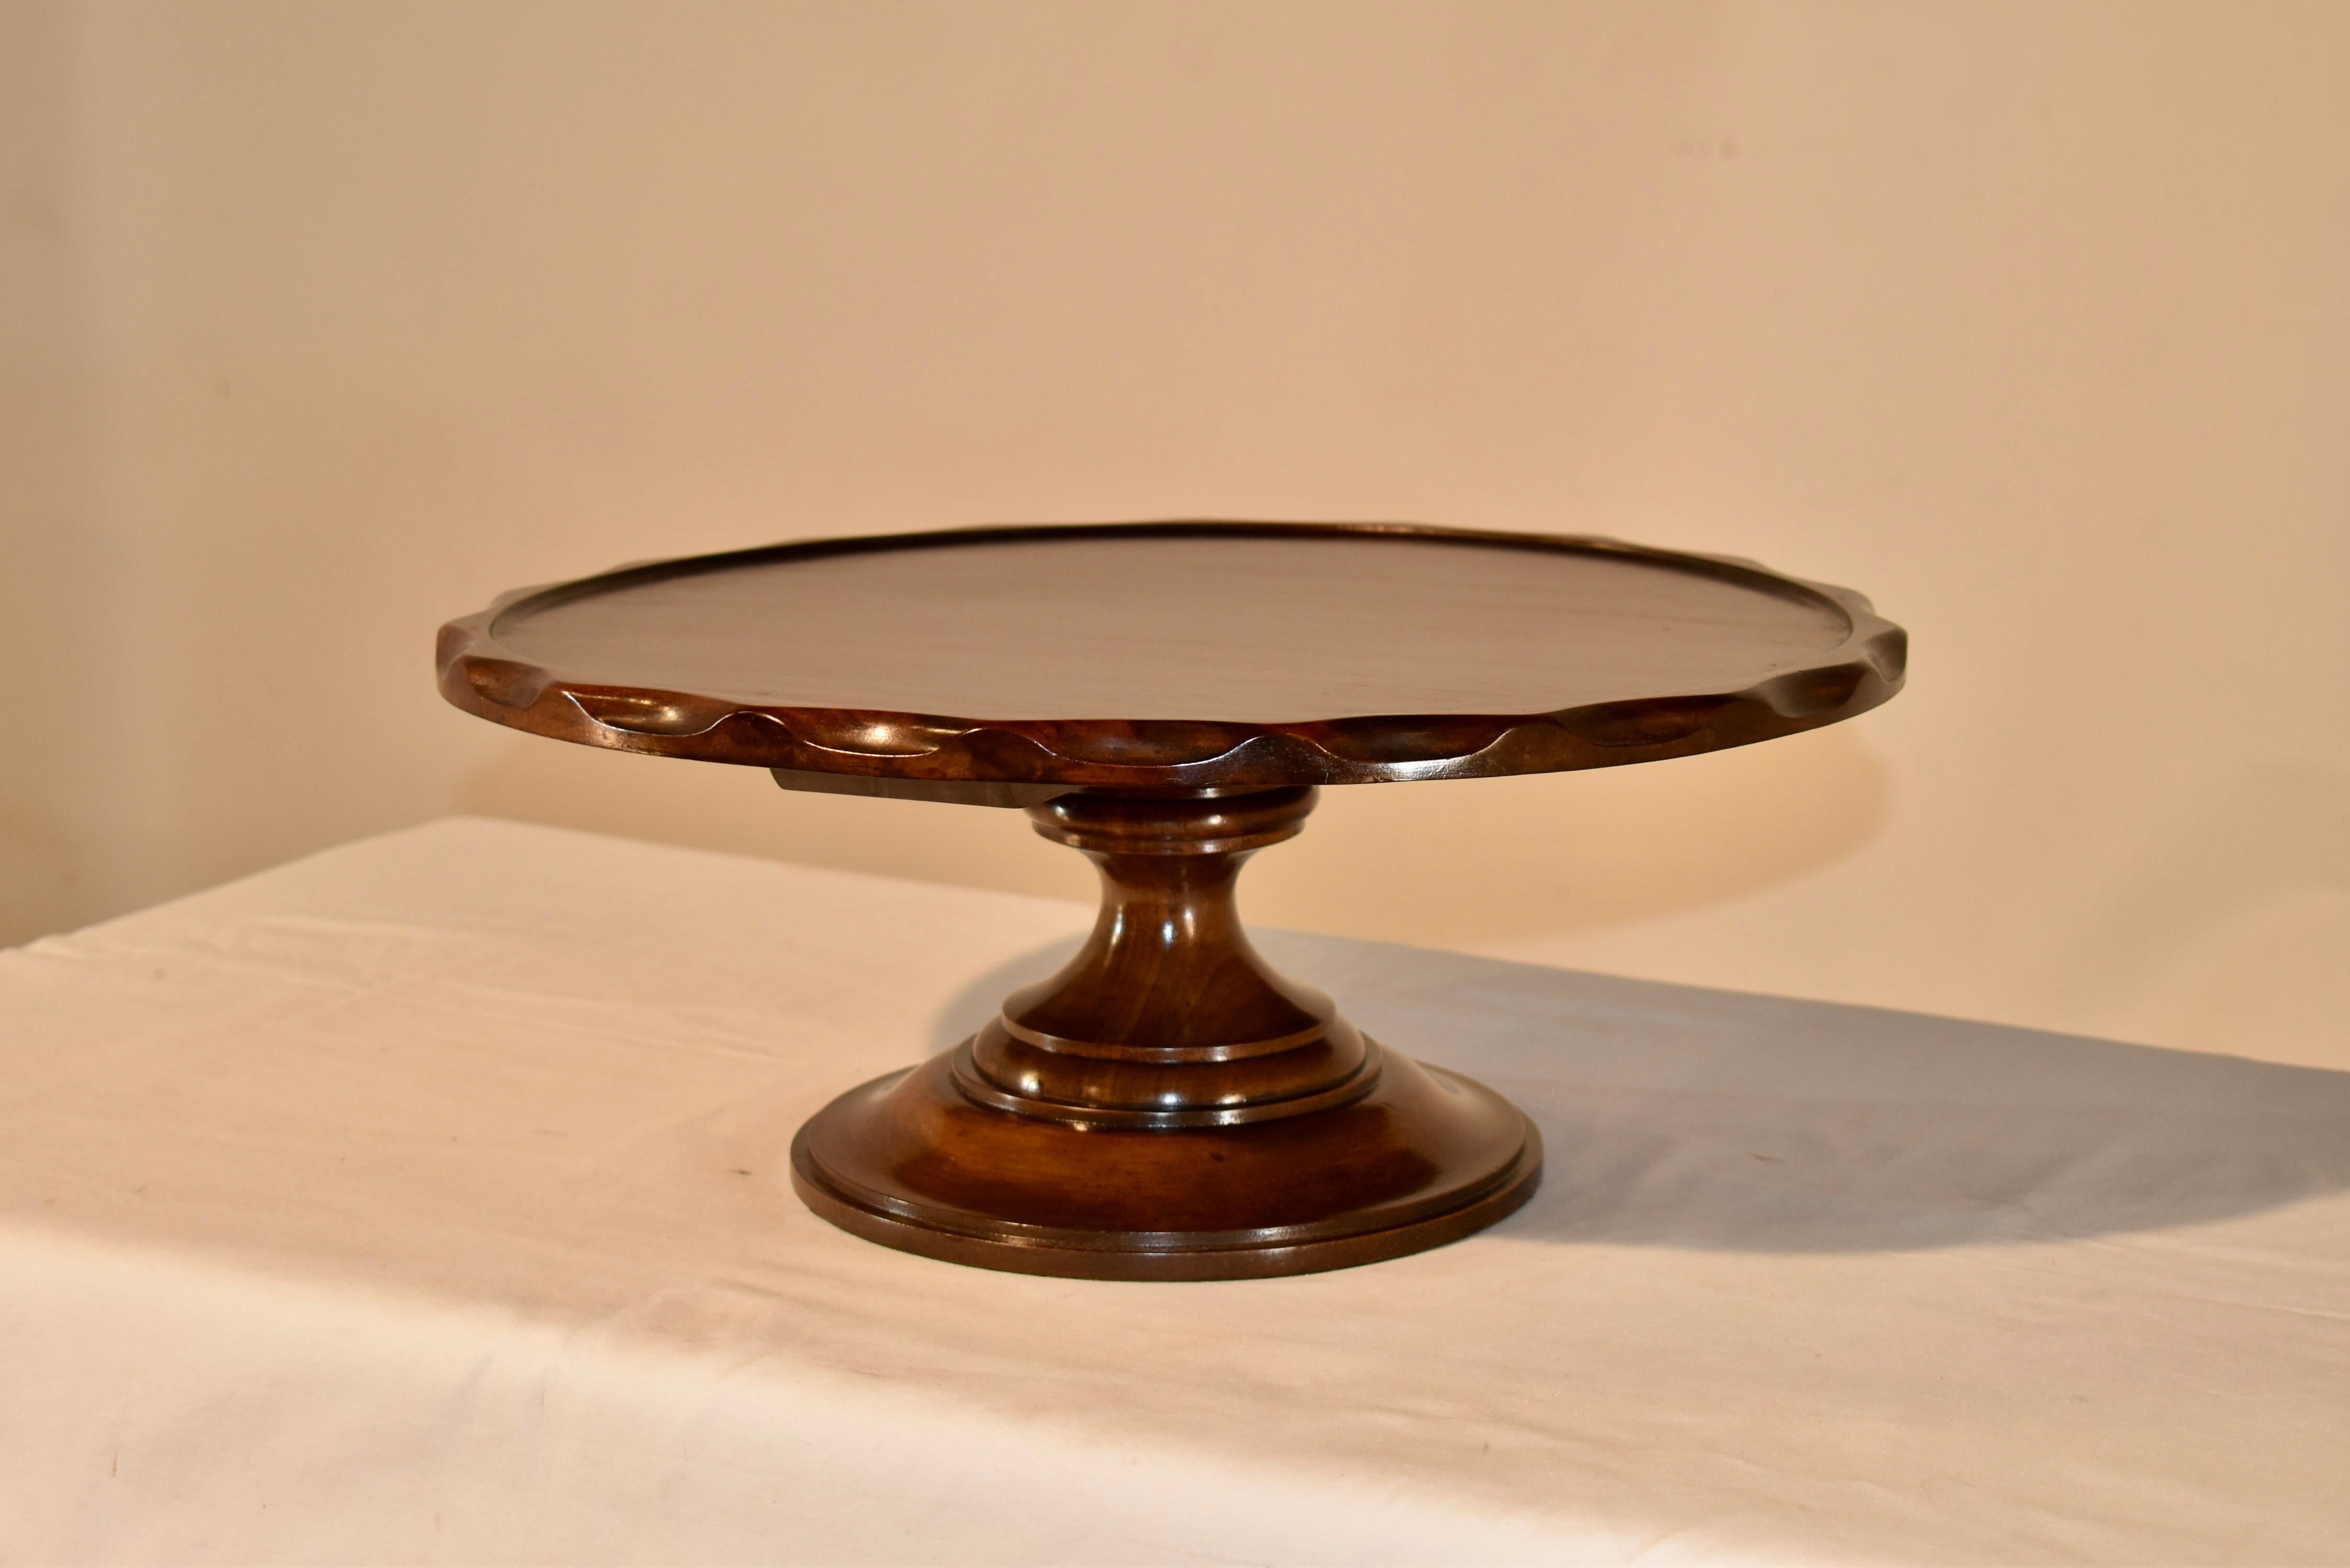 19th century English lazy Susan made from mahogany. The top is beautifully grained and has a molded pie crust edge, which is slightly raised as well for better utility. The top is supported on a hand turned base, which is a lovely form and gives the